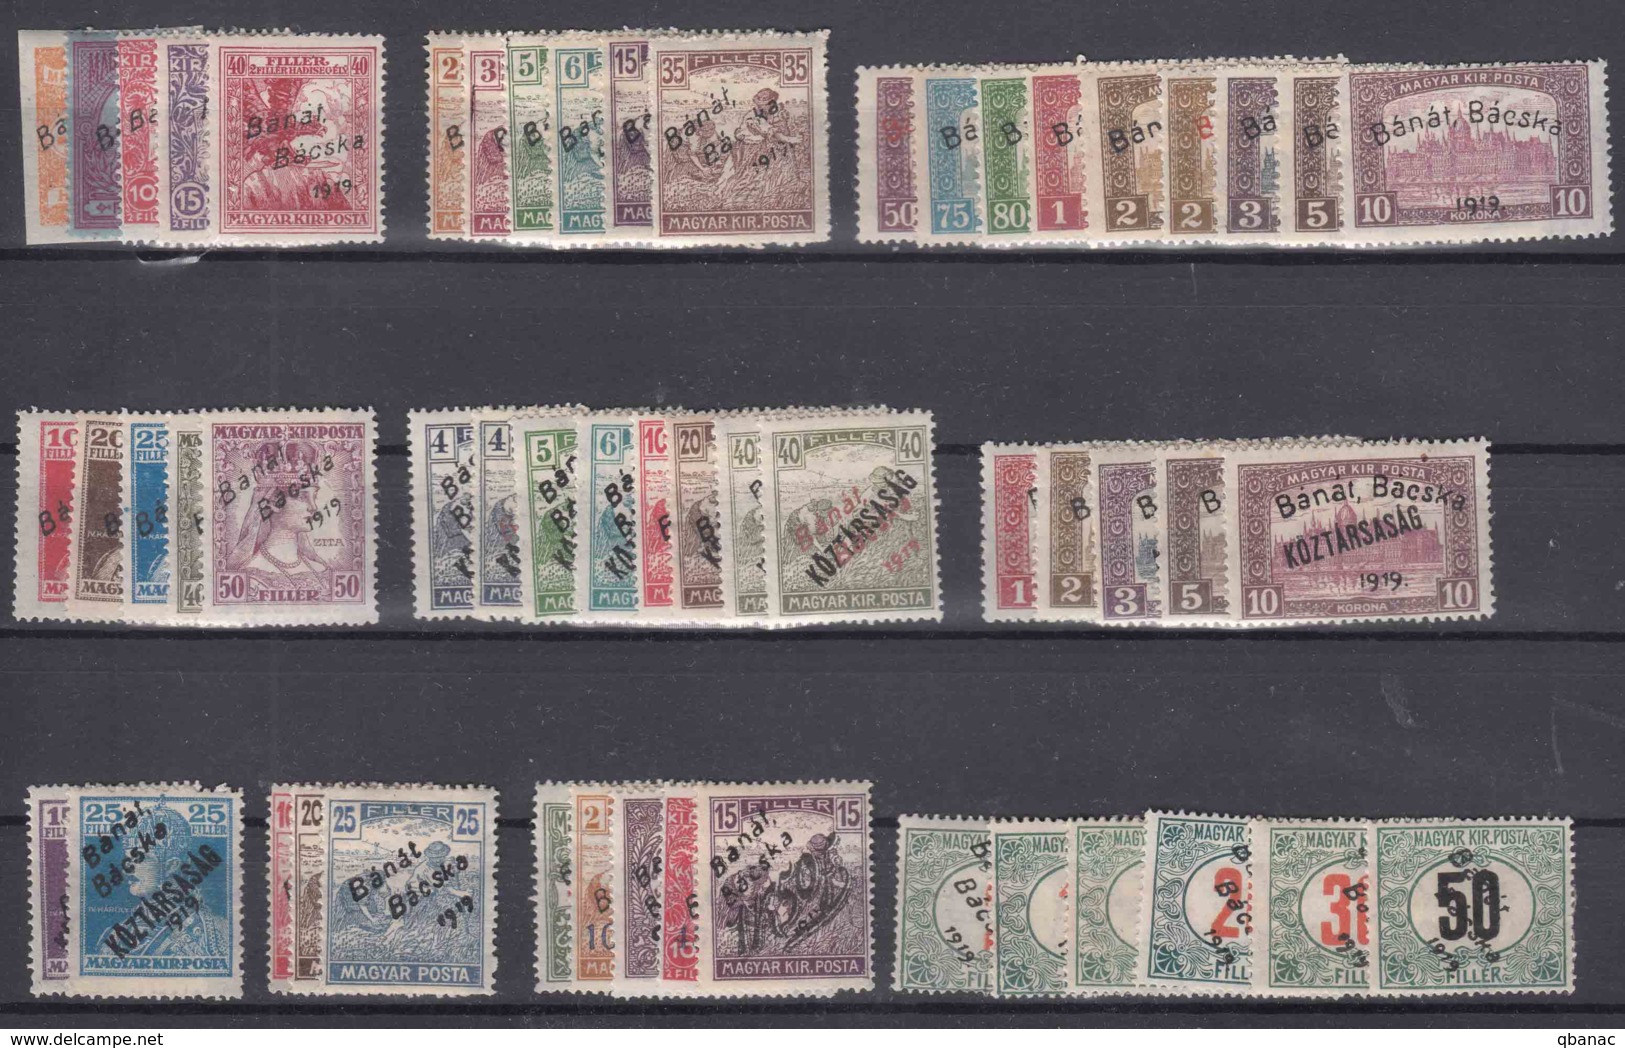 Hungary Banat Bacska Complete Colection Including Porto Stamps, All B Types (red Overprint) Included, Mint Hinged - Banat-Bacska